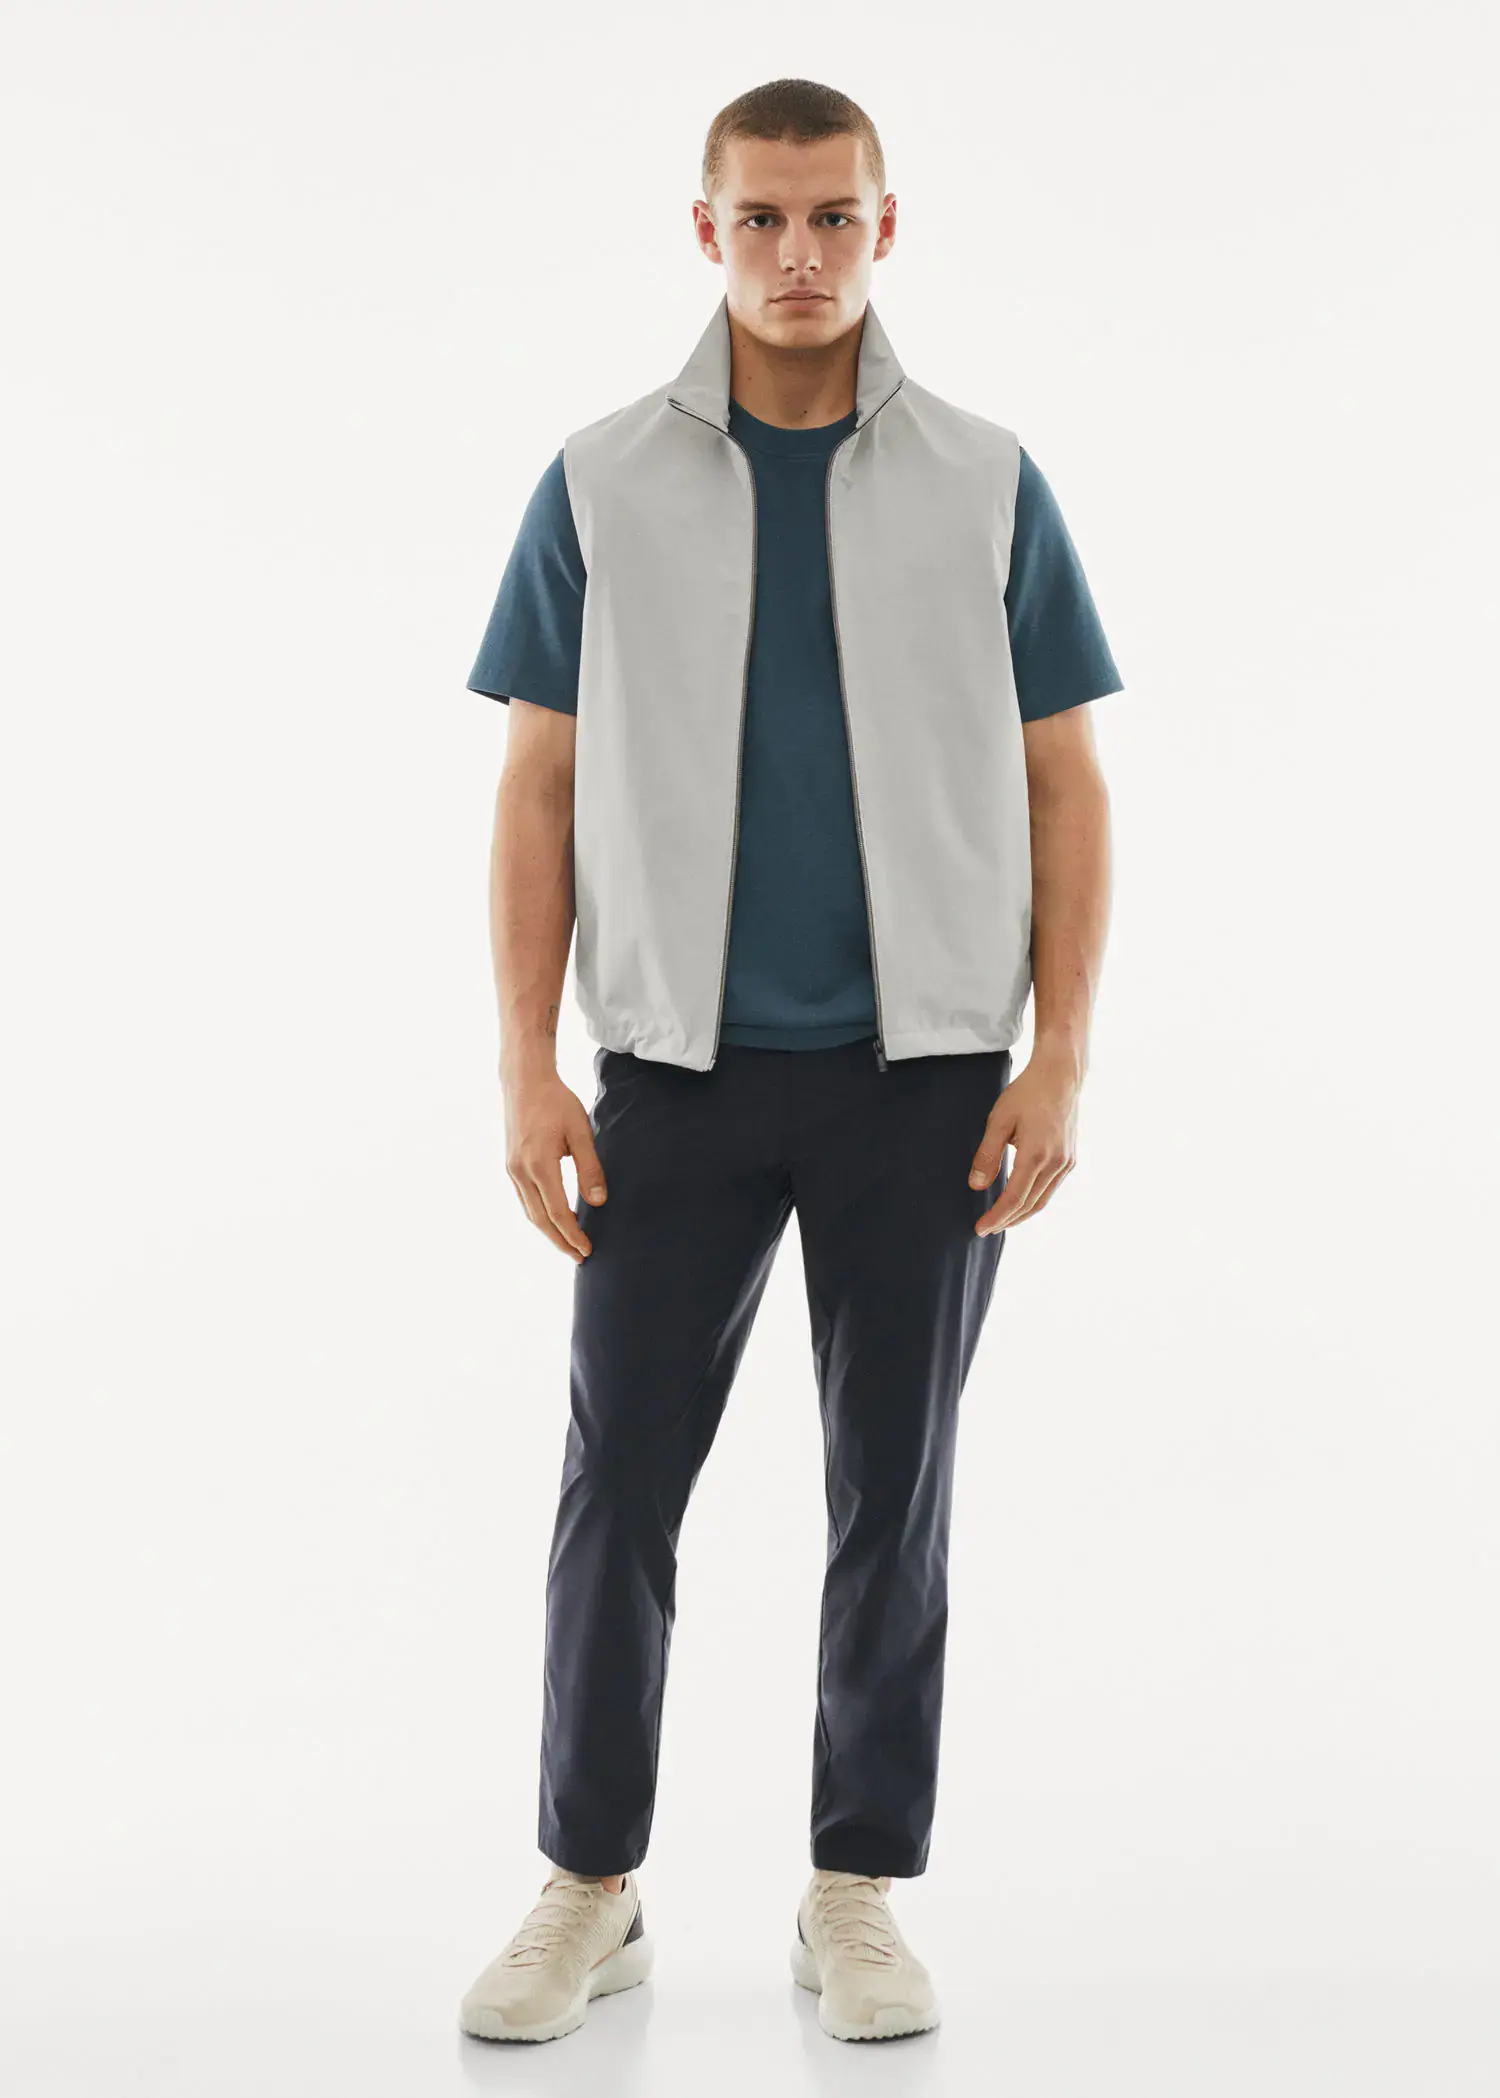 Mango Water-repellent technical gilet. a man wearing a white vest and a blue shirt. 